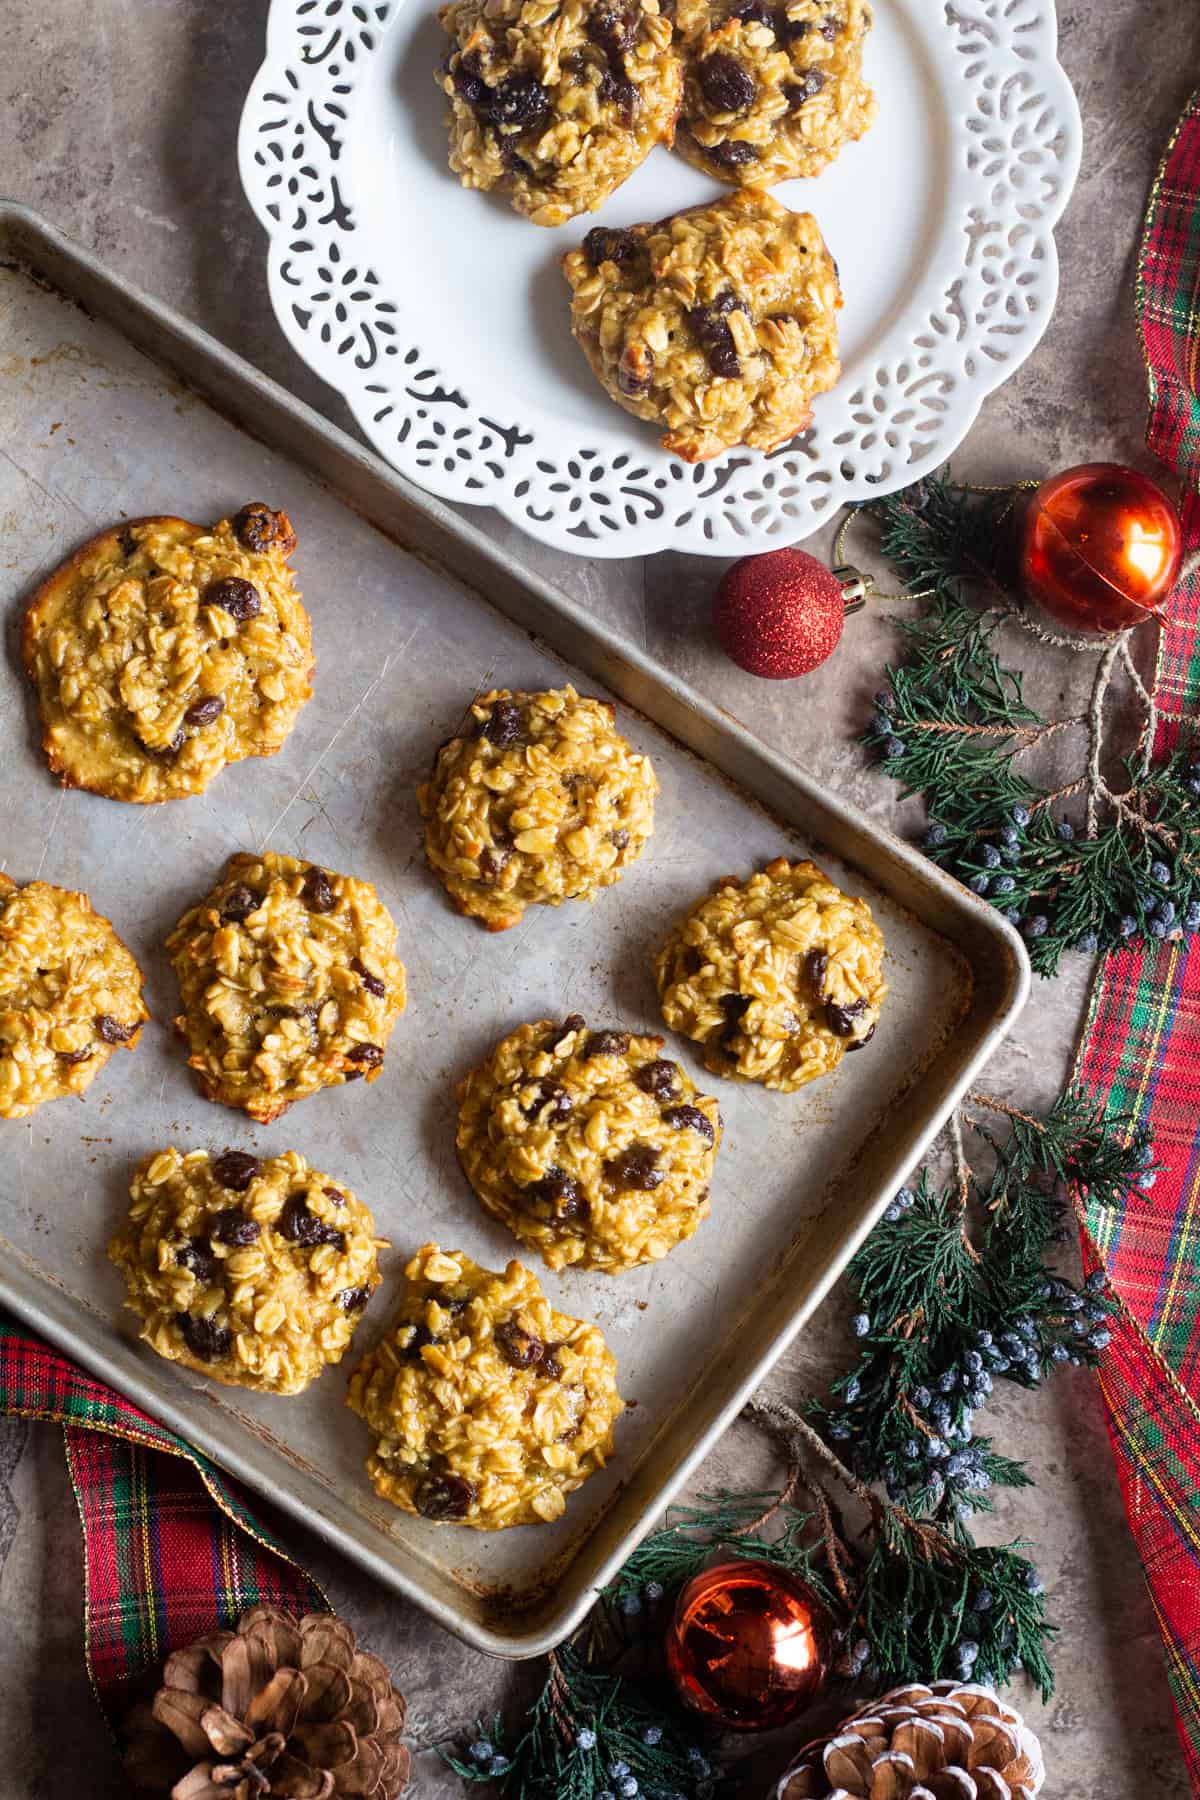 Learn how to make oatmeal cookies without butter that are chewy and delicious. These healthy oatmeal raisin cookies are naturally sweetened.